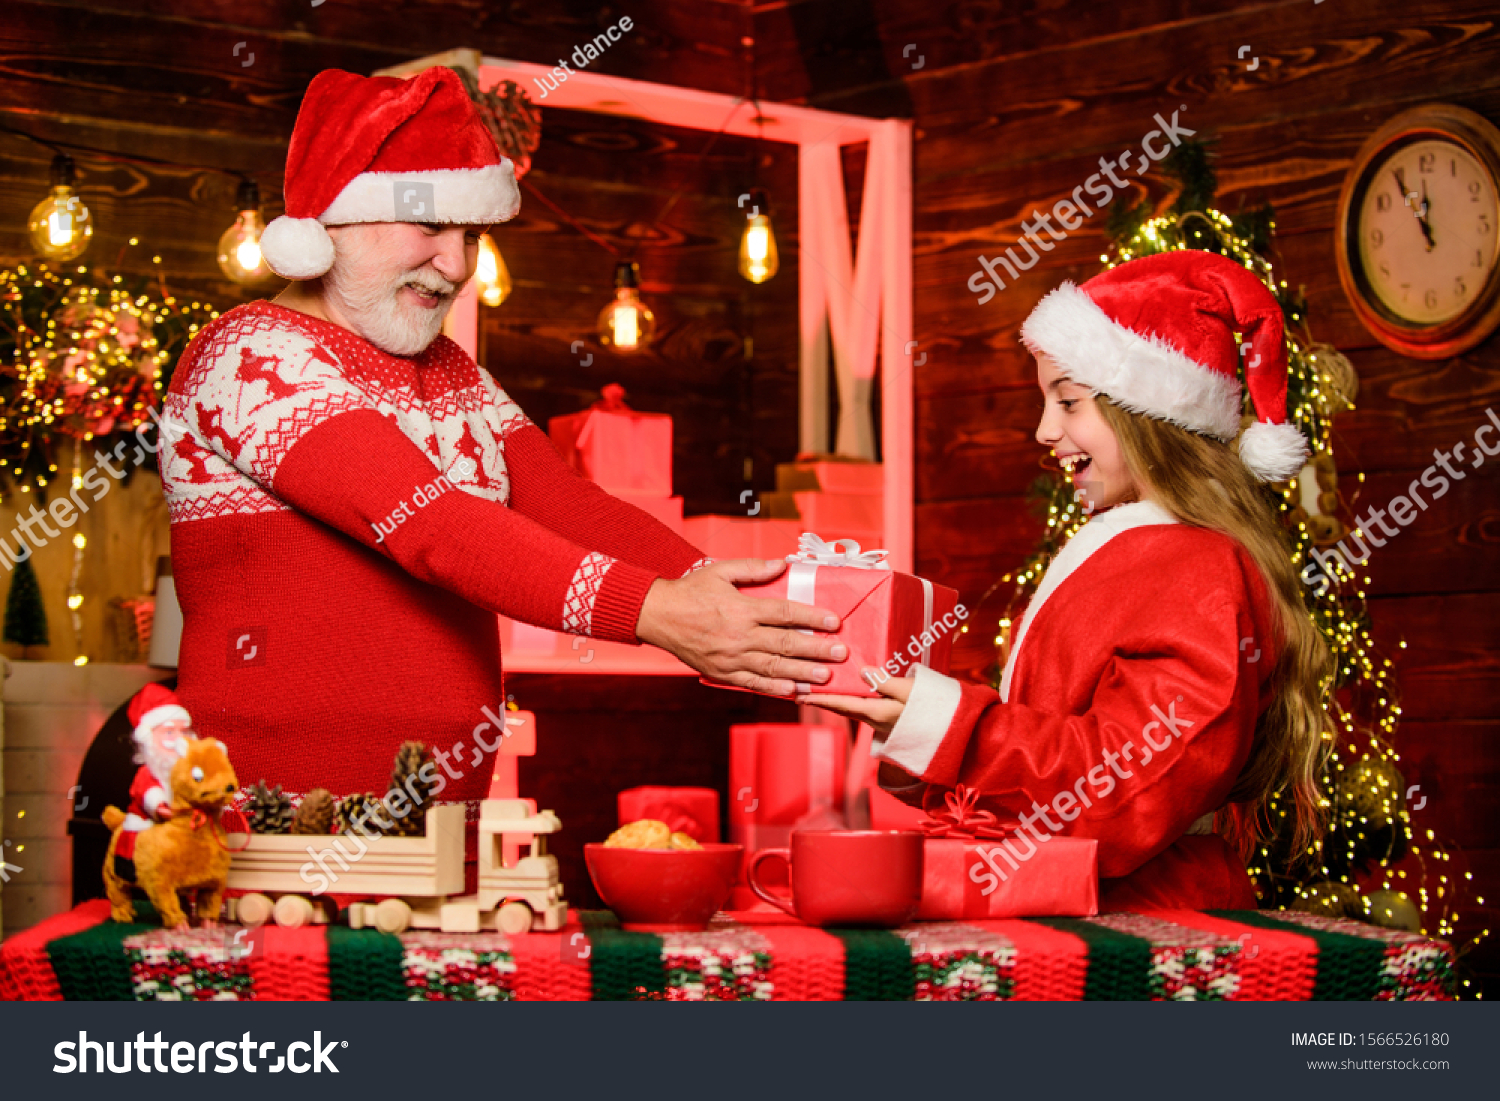 Santa Claus generous. Happiness and joy. Rewarding kindness. Santa bring gifts little girl. Cheerful celebration. Festive tradition. Child enjoy christmas with bearded grandfather Santa claus. #1566526180